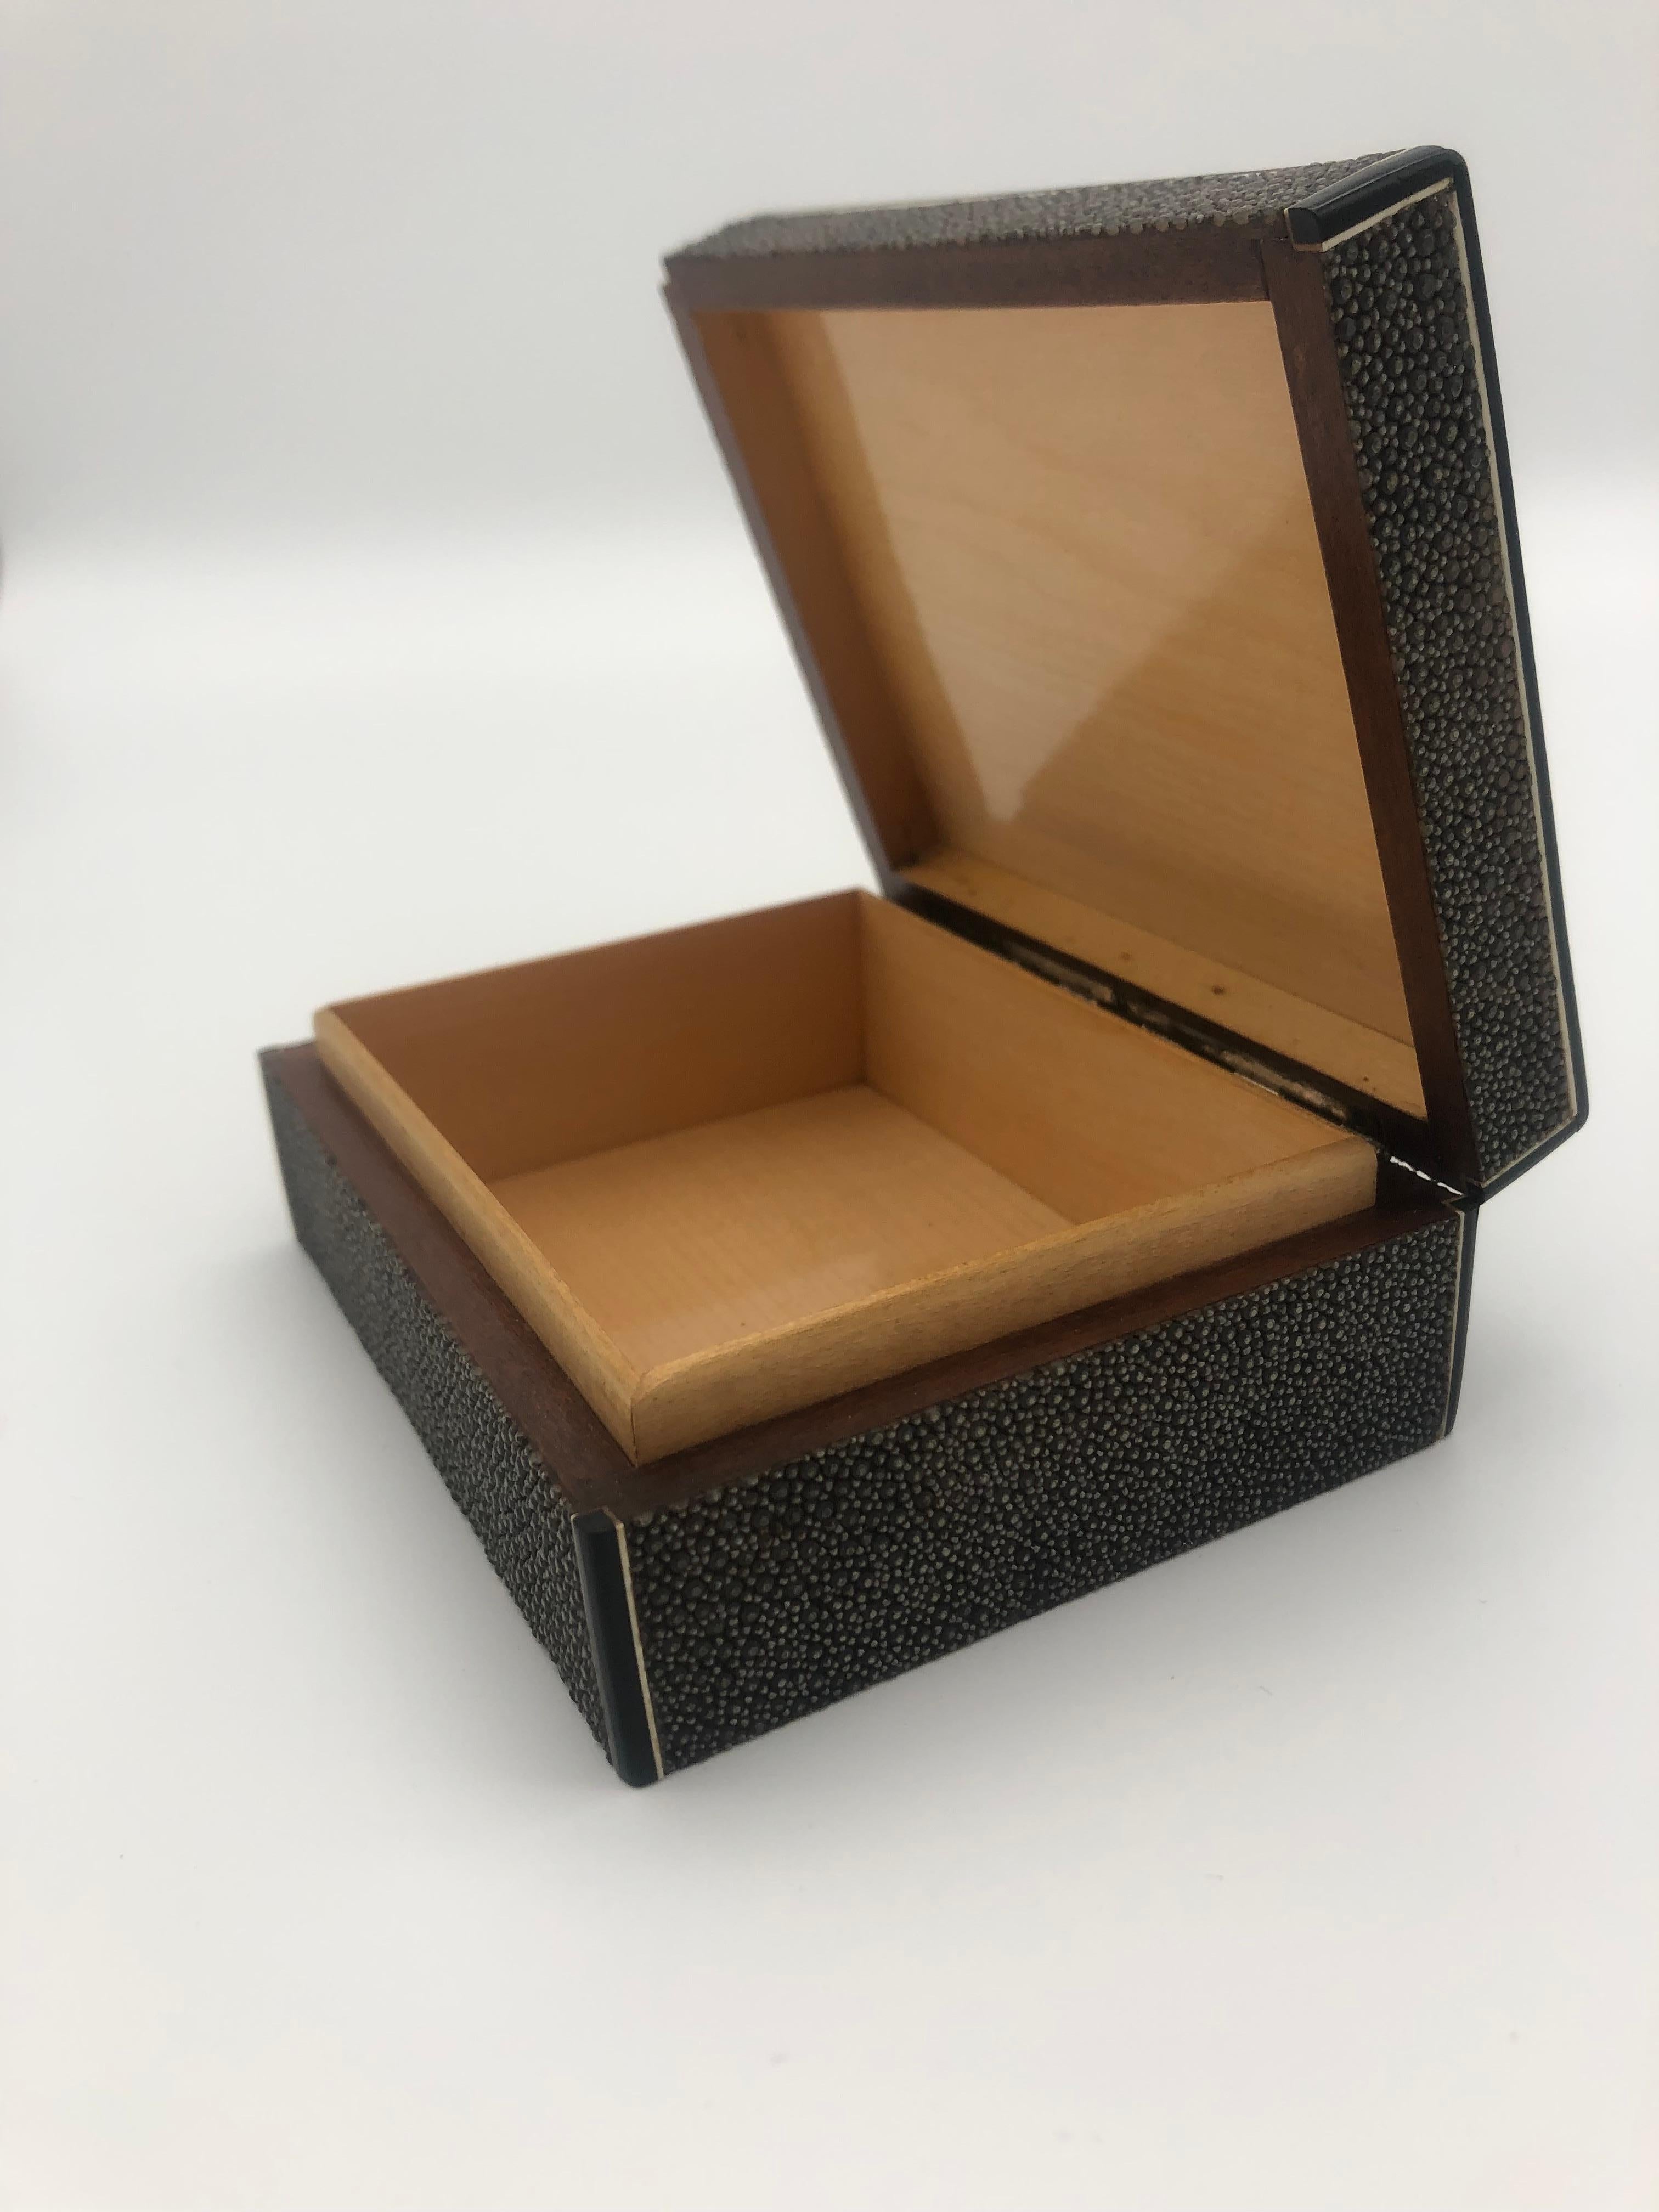 Austrian or French Art Deco period wood box,  overed with stingray skin. Excellent, skillfully executed craftmanship.
The geometric skin is framed is made by ebonised rosewood and small bone intarsia.
The interior is made out of  sycamore wood.
On